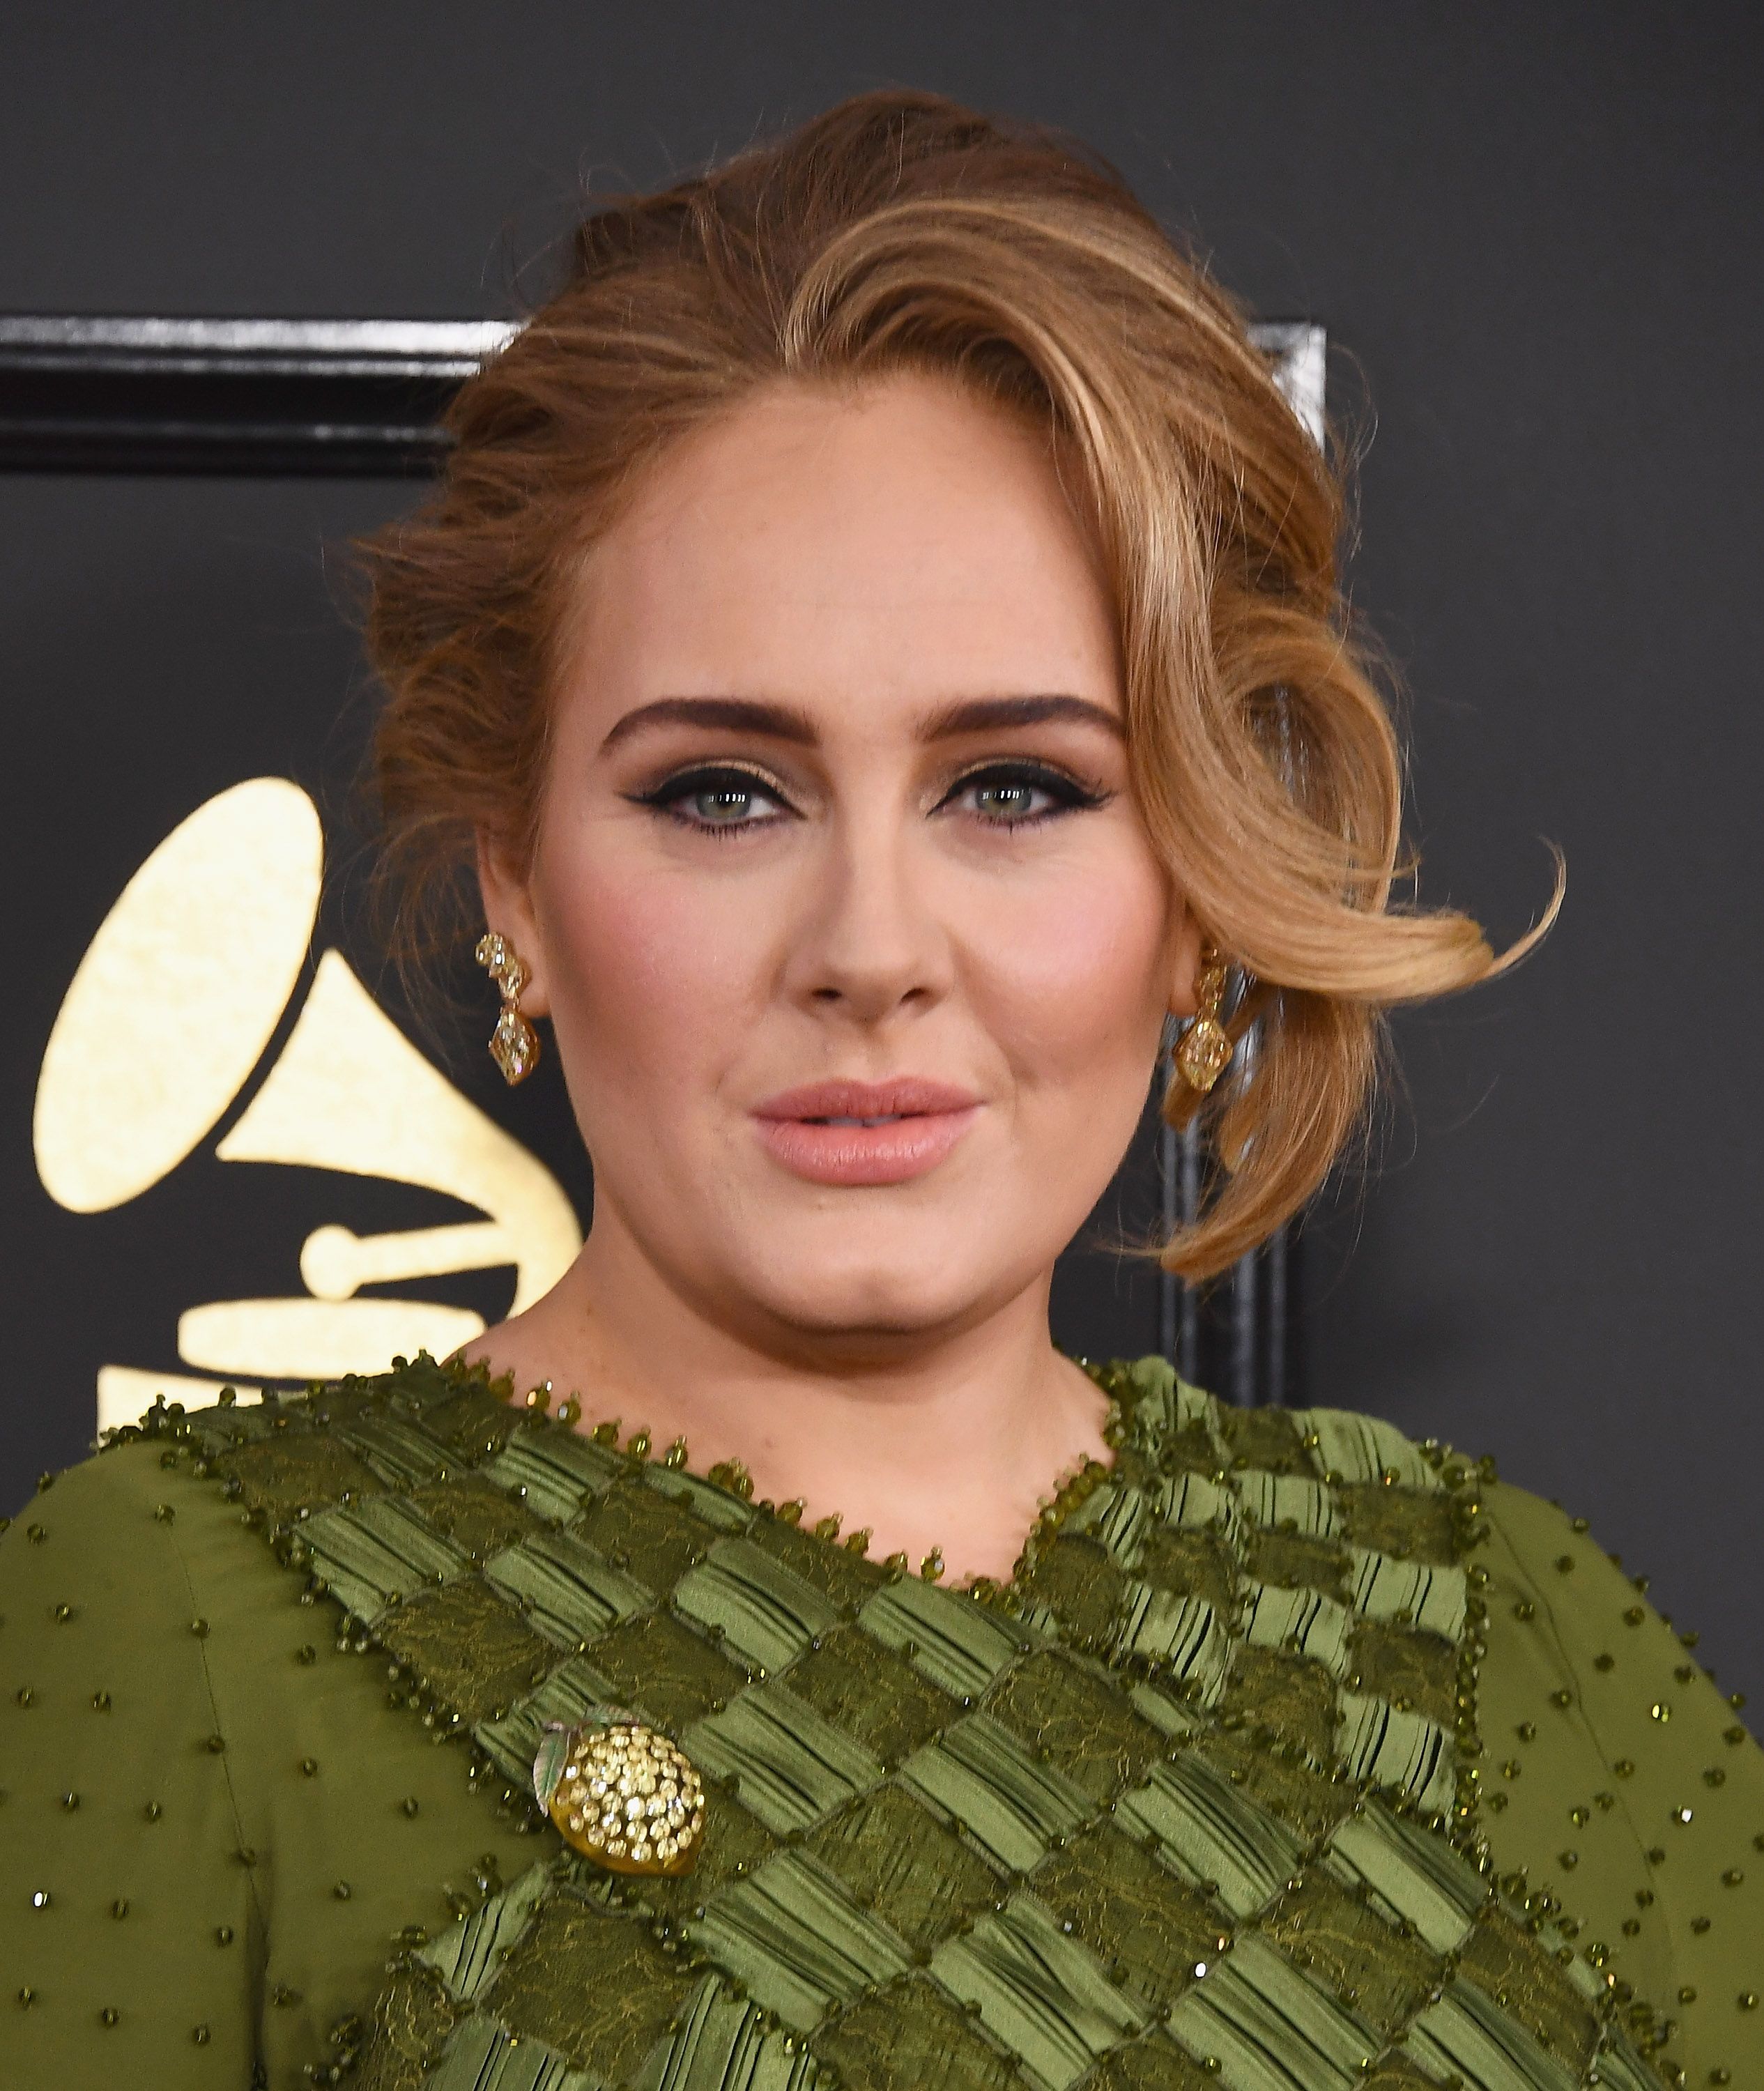 Adele reportedly tells fan about 100-pound weight loss